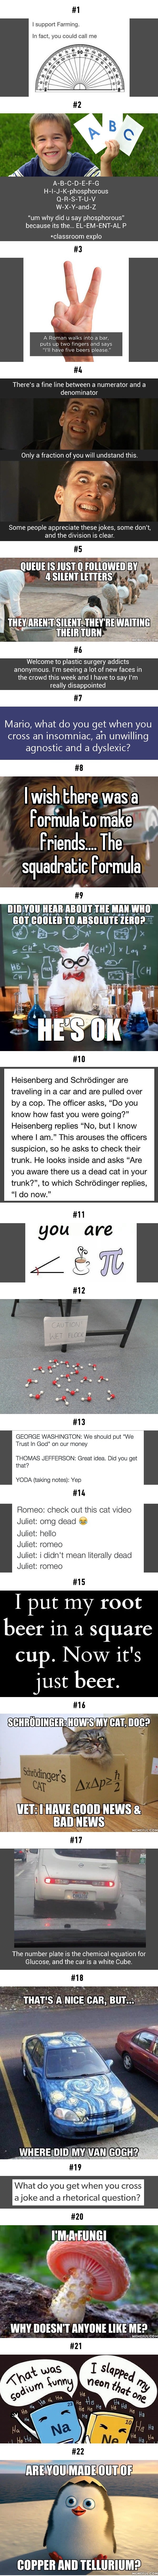 You're pretty smart if you get these jokes